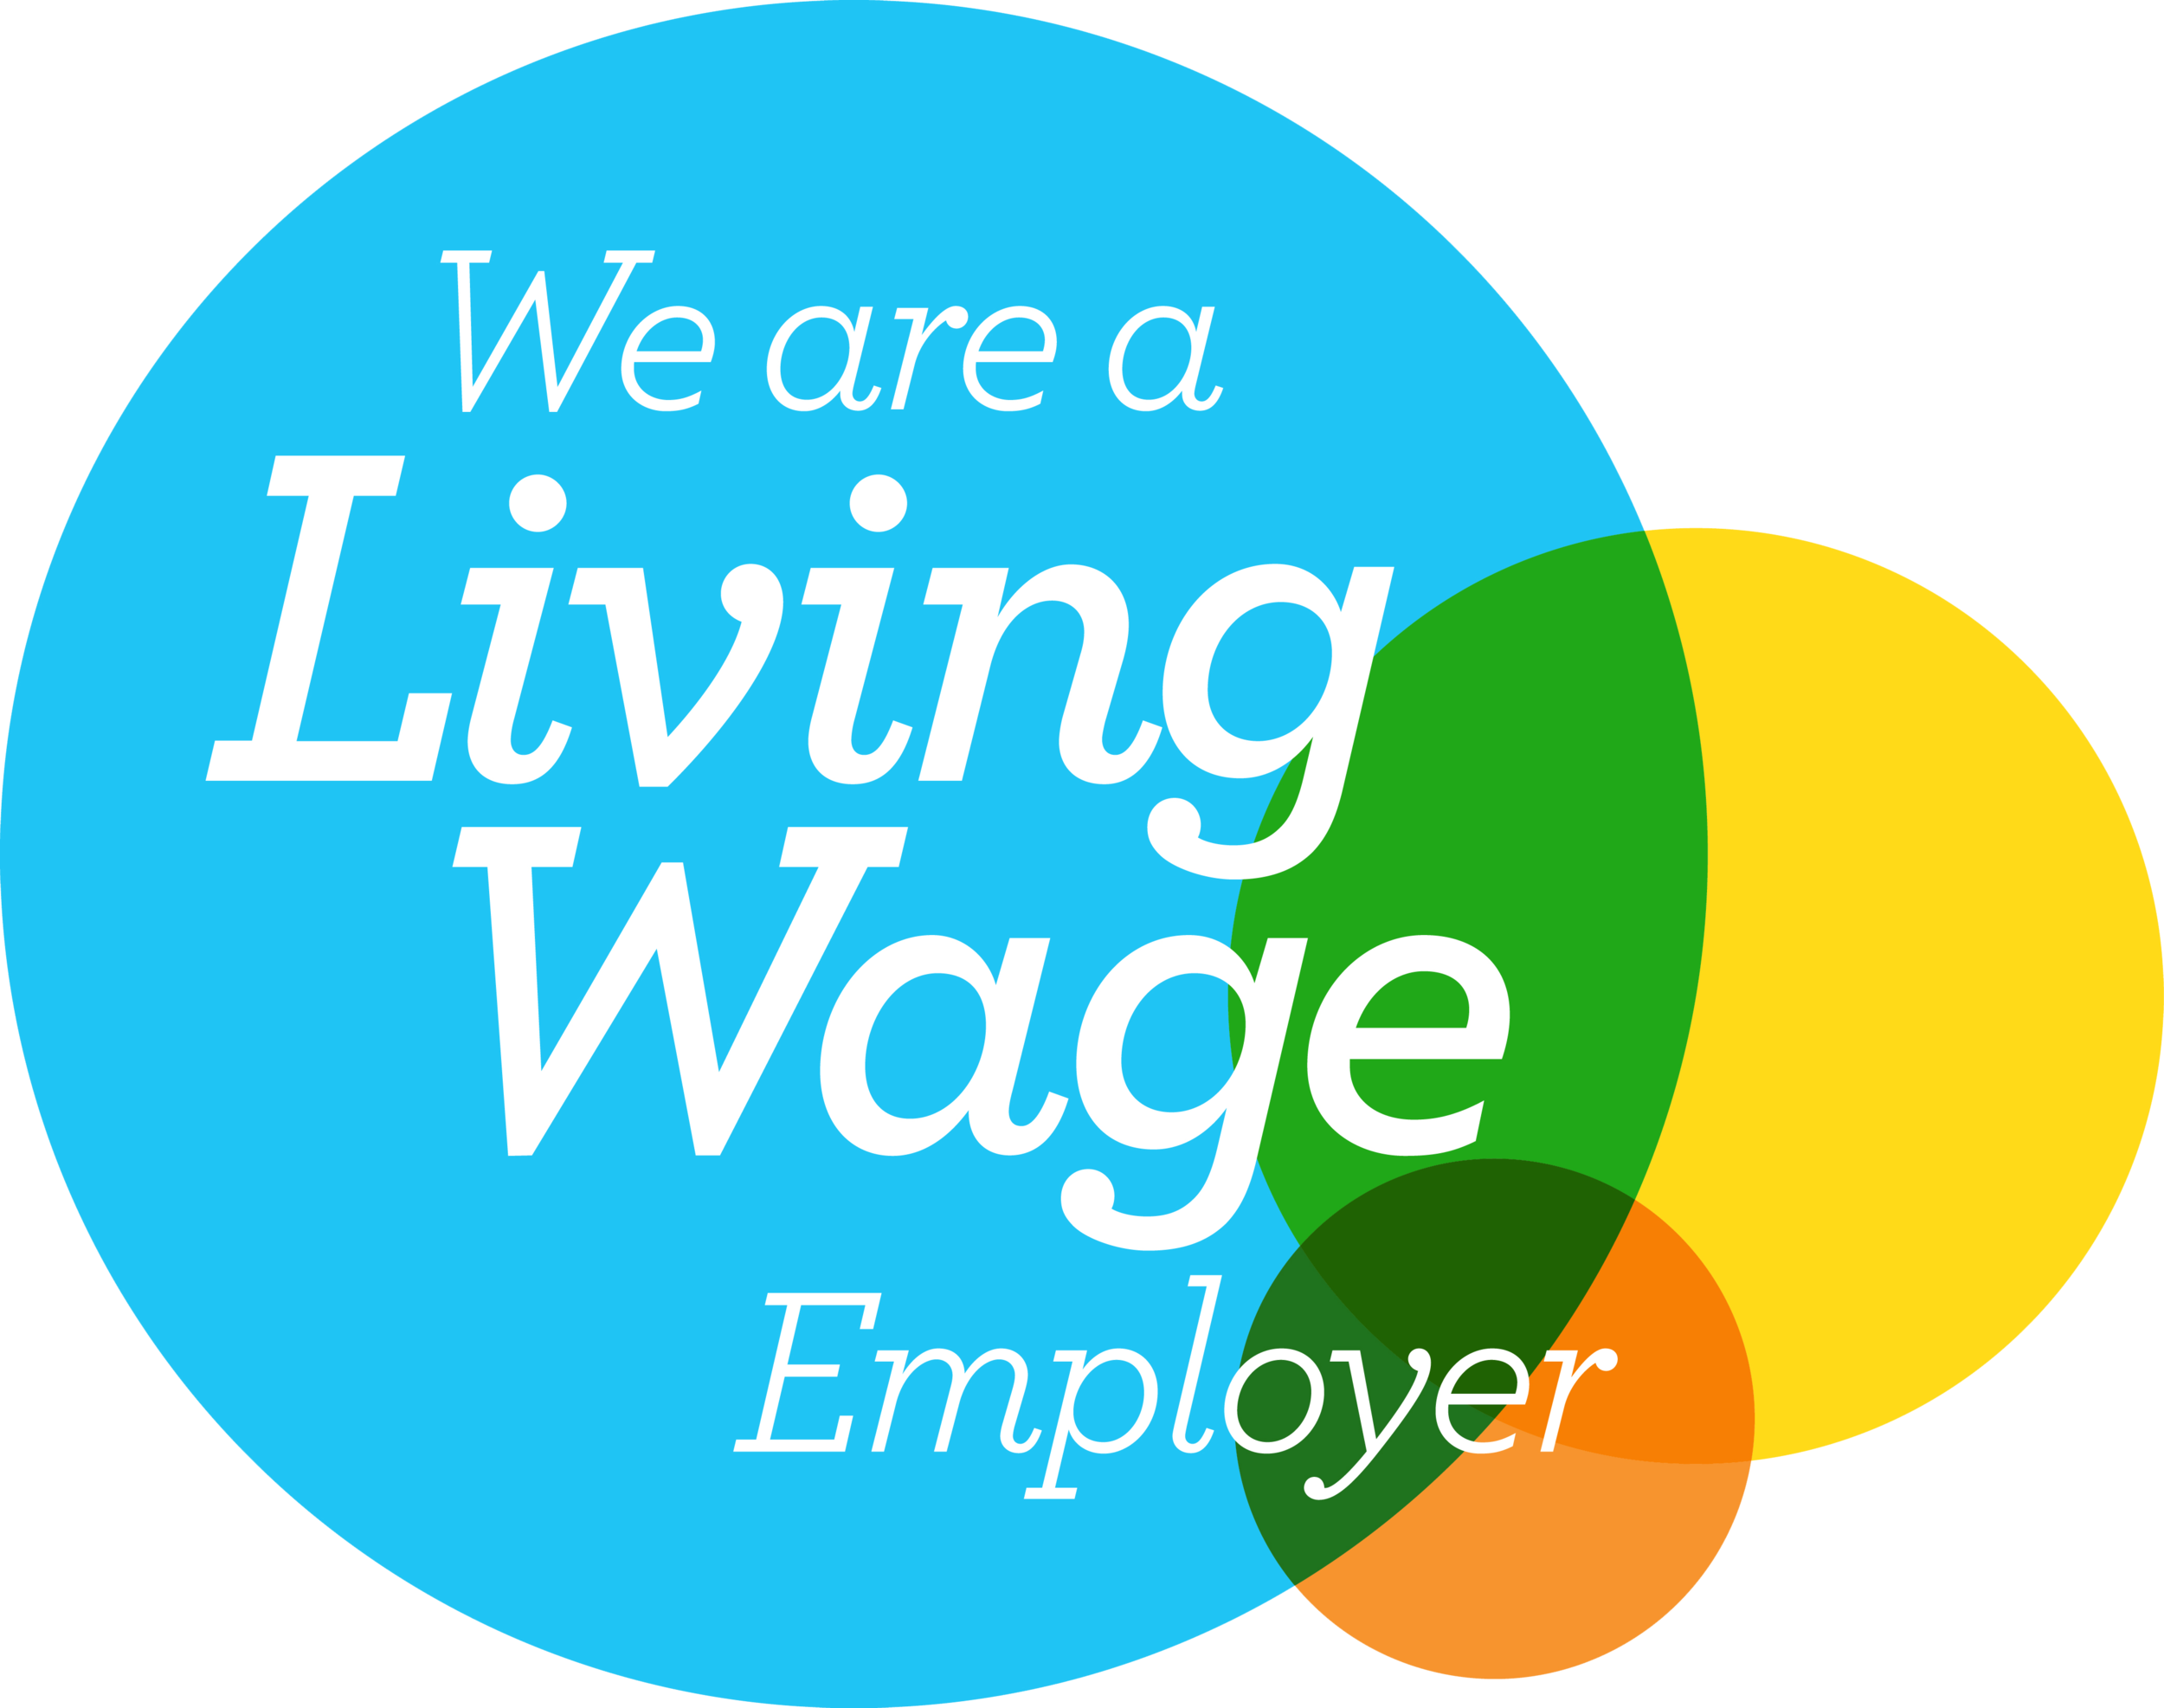 We are living wage employer